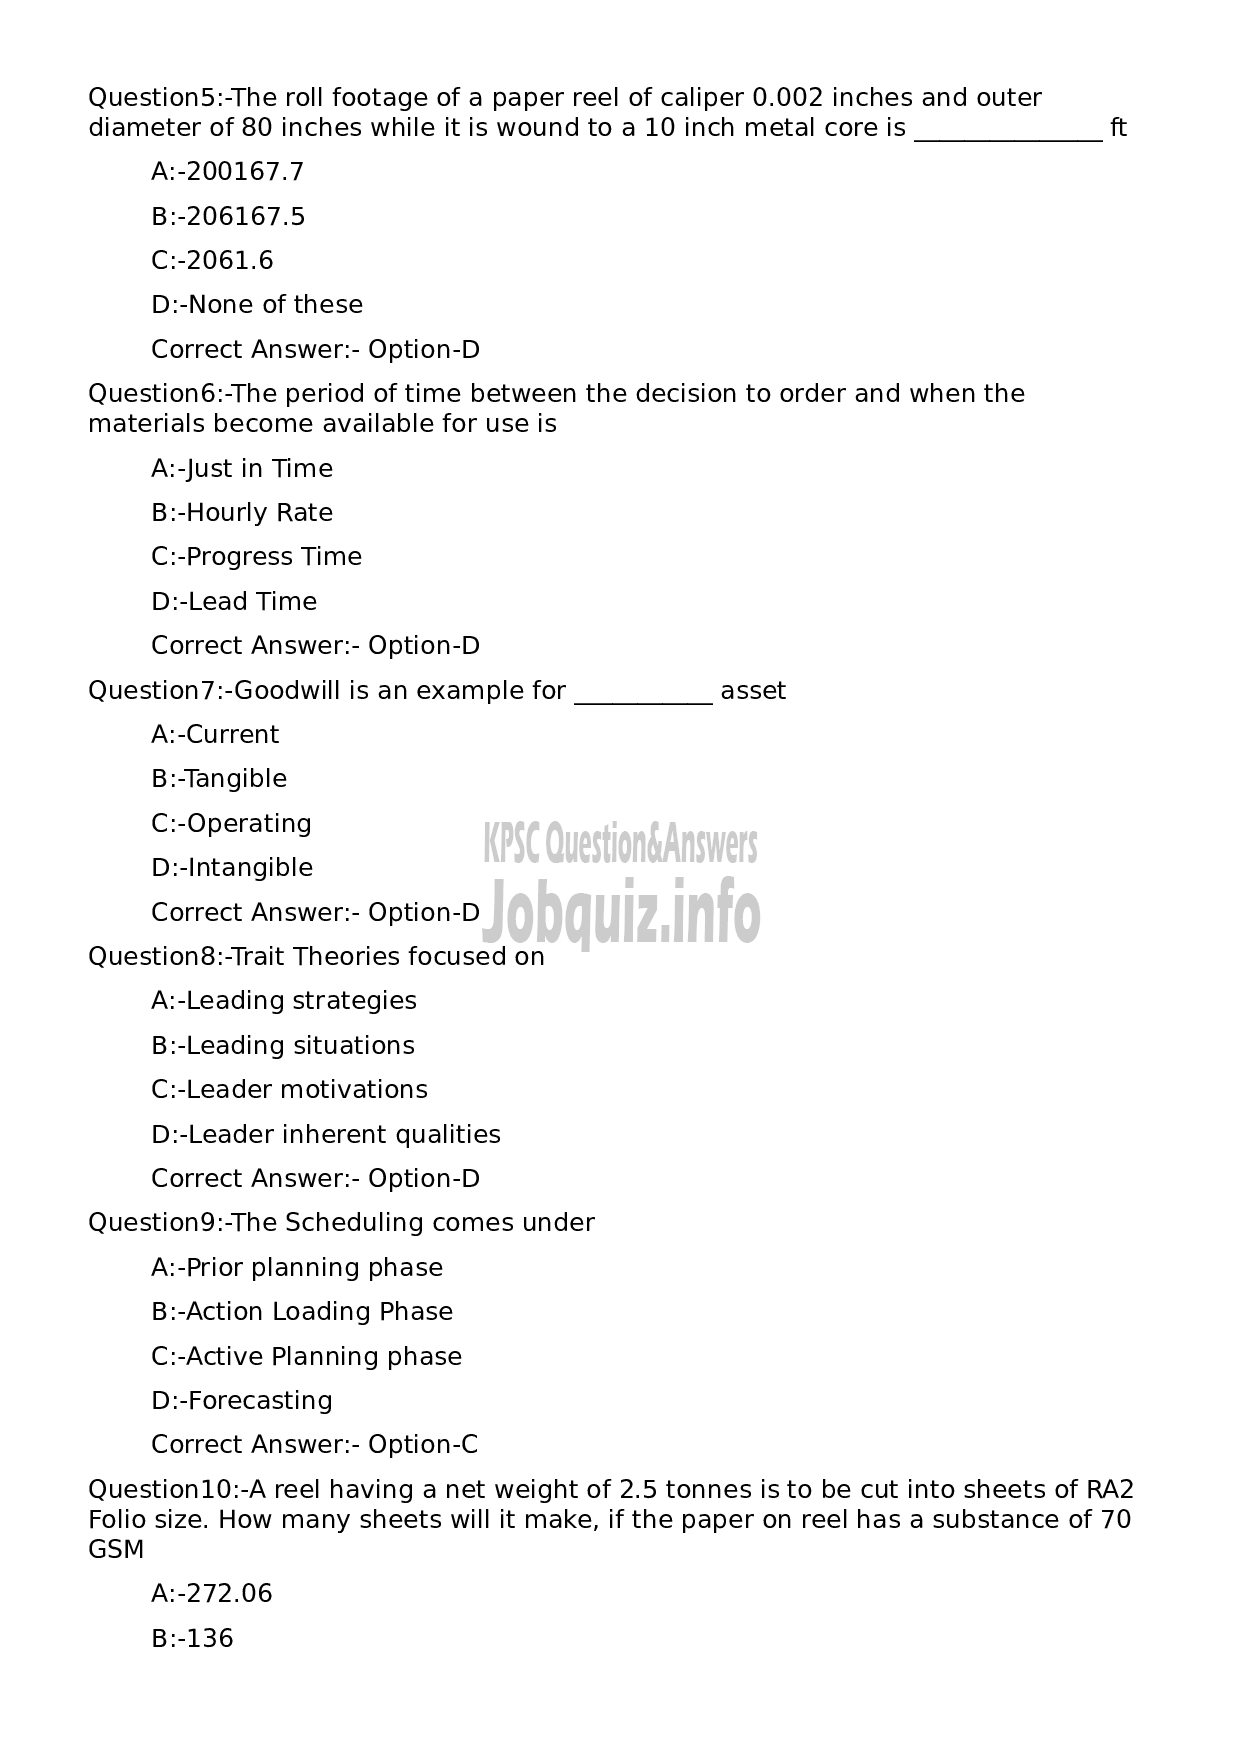 Kerala PSC Question Paper - Lecturer in Printing Technology-2